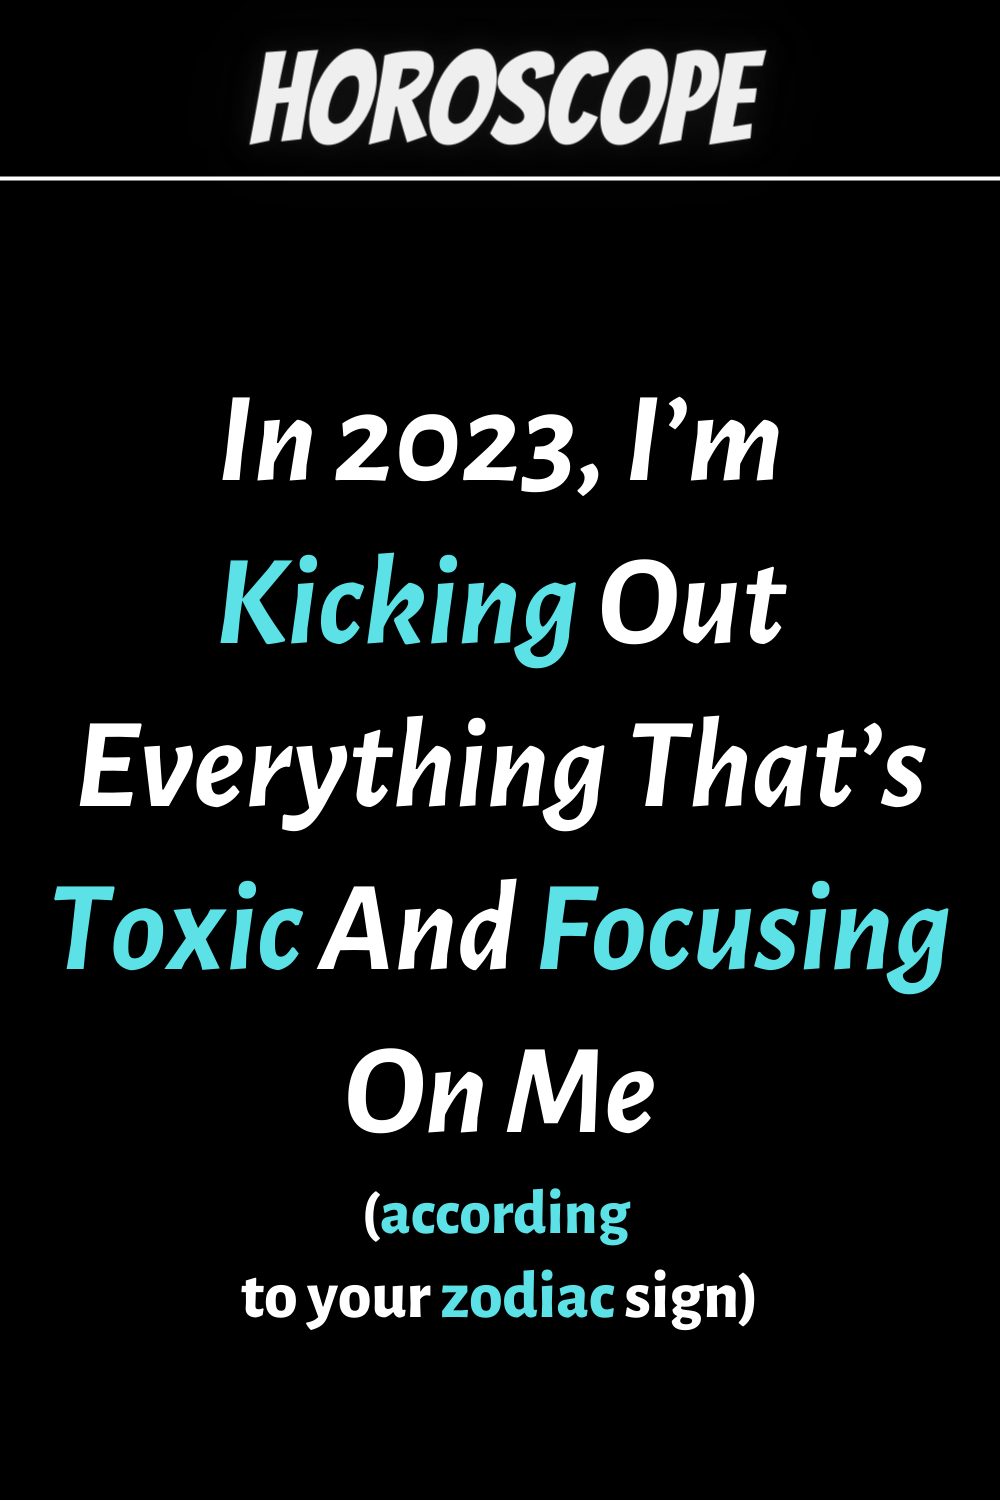 In 2023, I’m Kicking Out Everything That’s Toxic And Focusing On Me